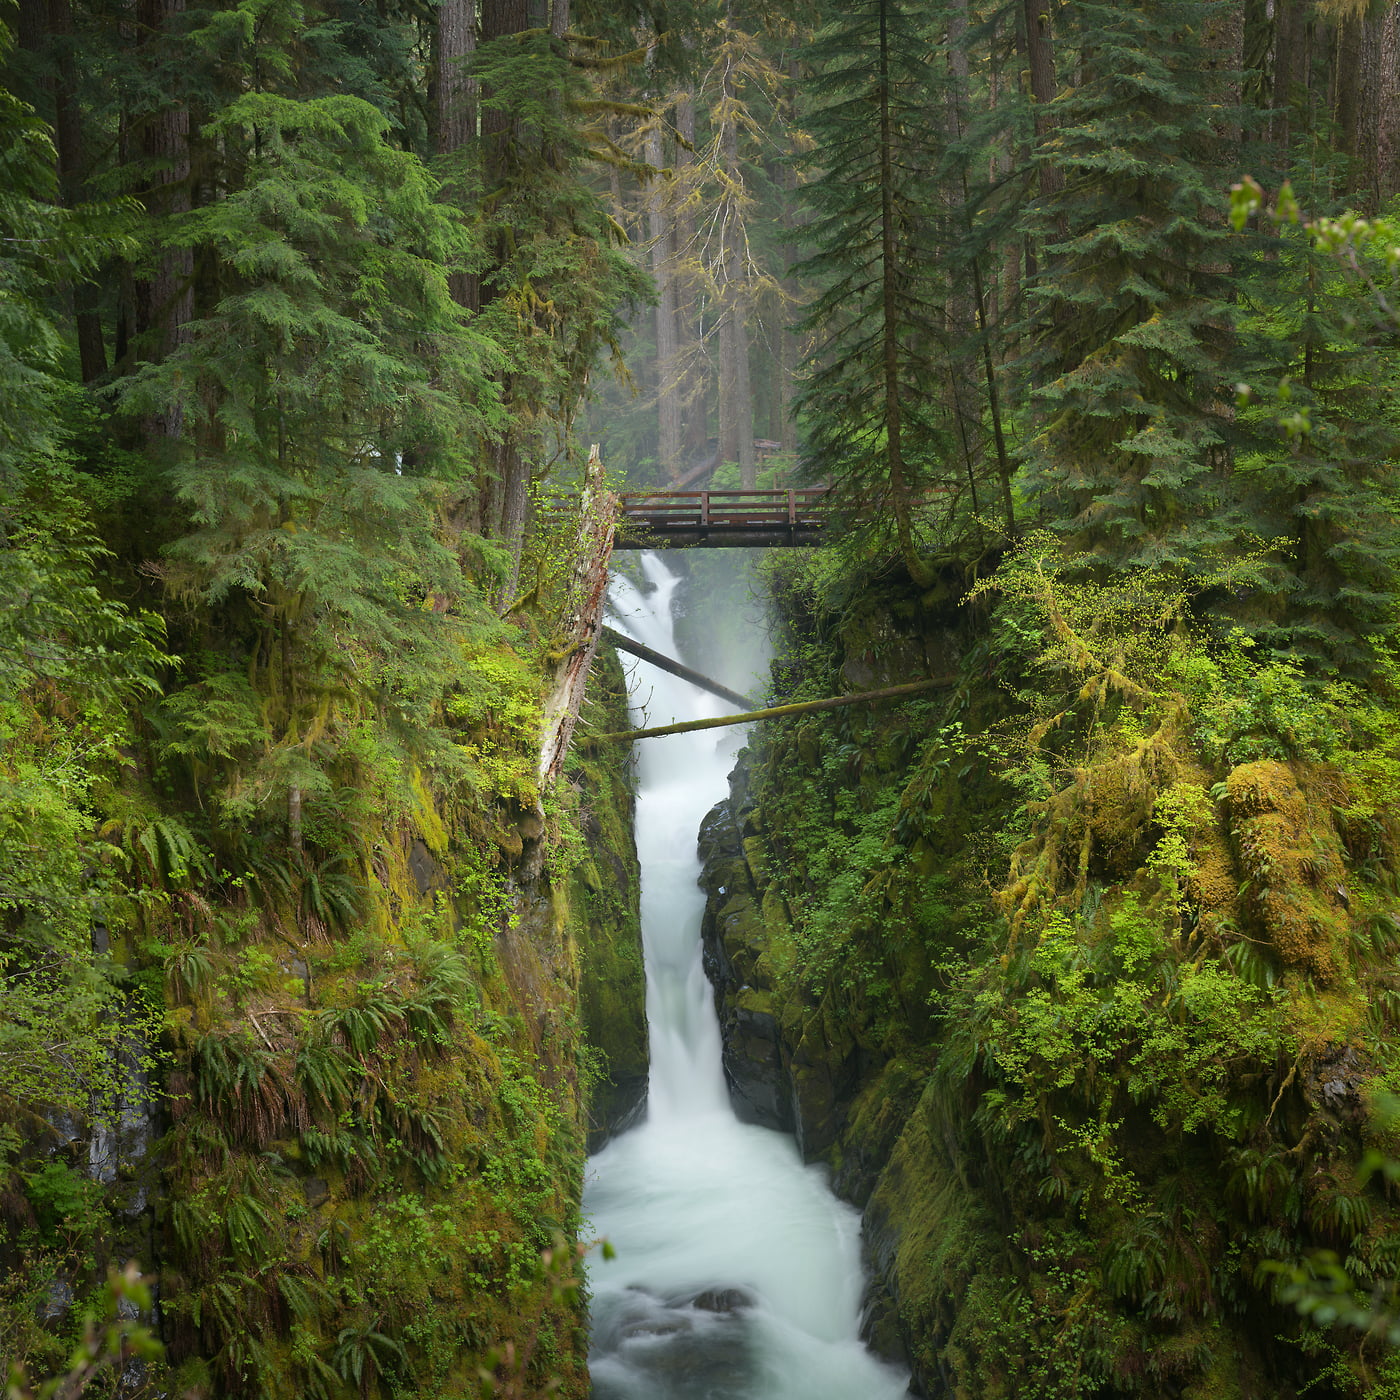 946 megapixels! A very high resolution, large-format VAST photo print of a waterfall in a green forest; nature photograph created by Greg Probst in Sol Duc Falls, Olympic National Park.